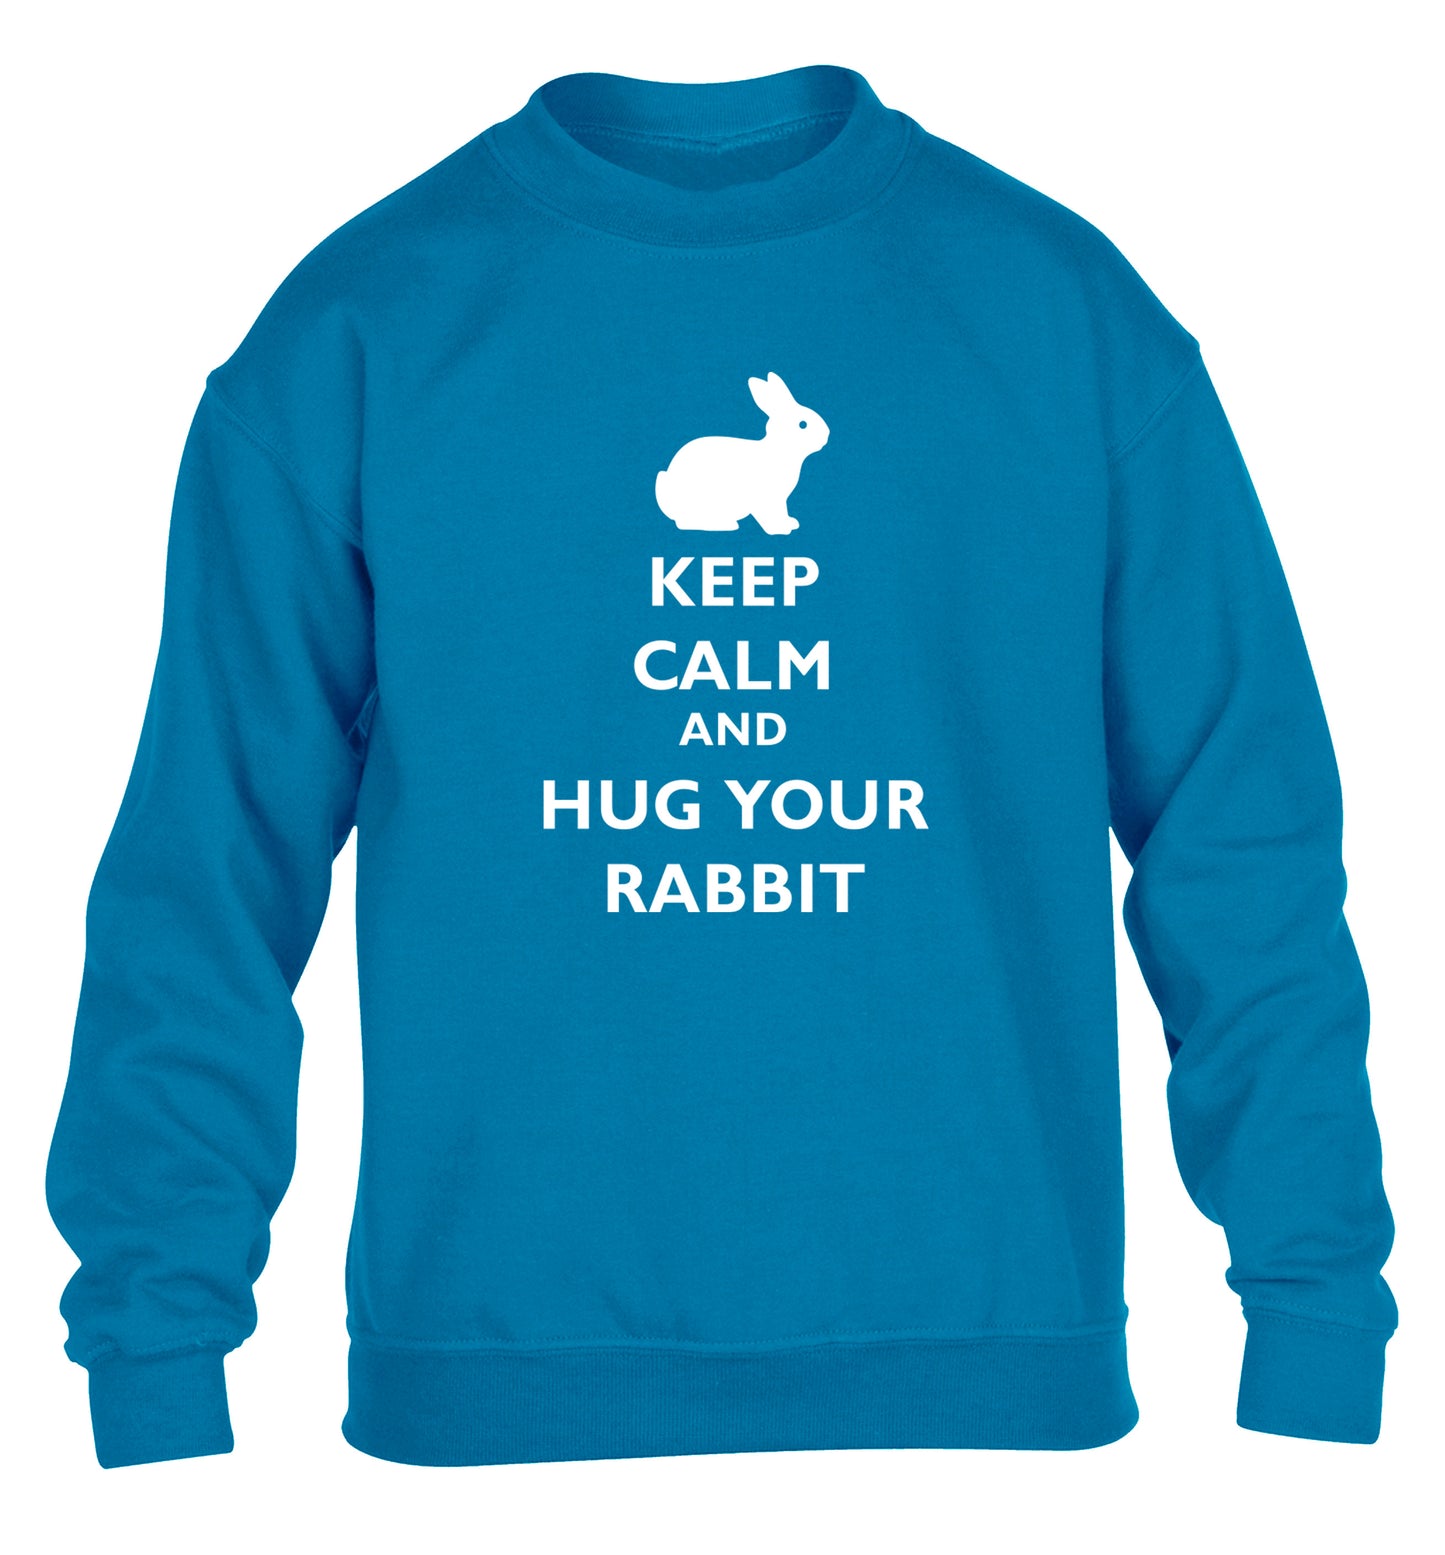 Keep calm and hug your rabbit children's blue sweater 12-13 Years